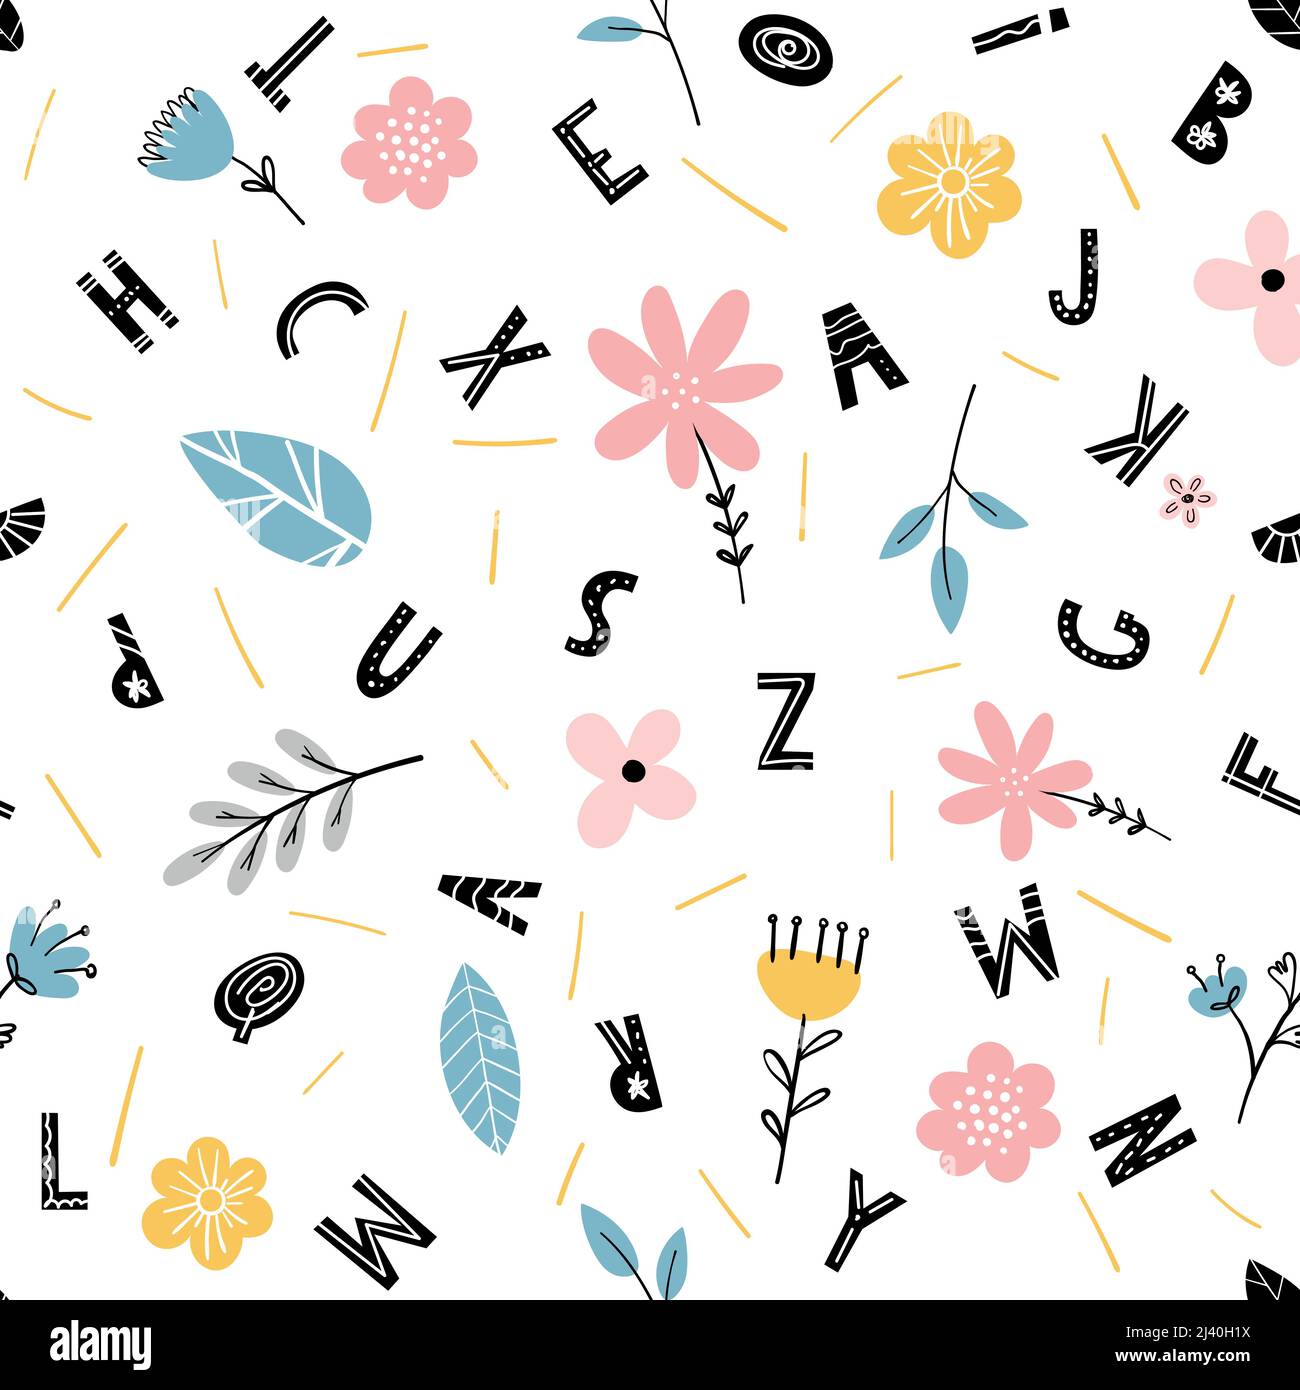 Cute seamless pattern with flowers and alphabet letters on white background, for baby fabric, scrapbooking, hobby. Naive simple flat design elements. Stock Vector